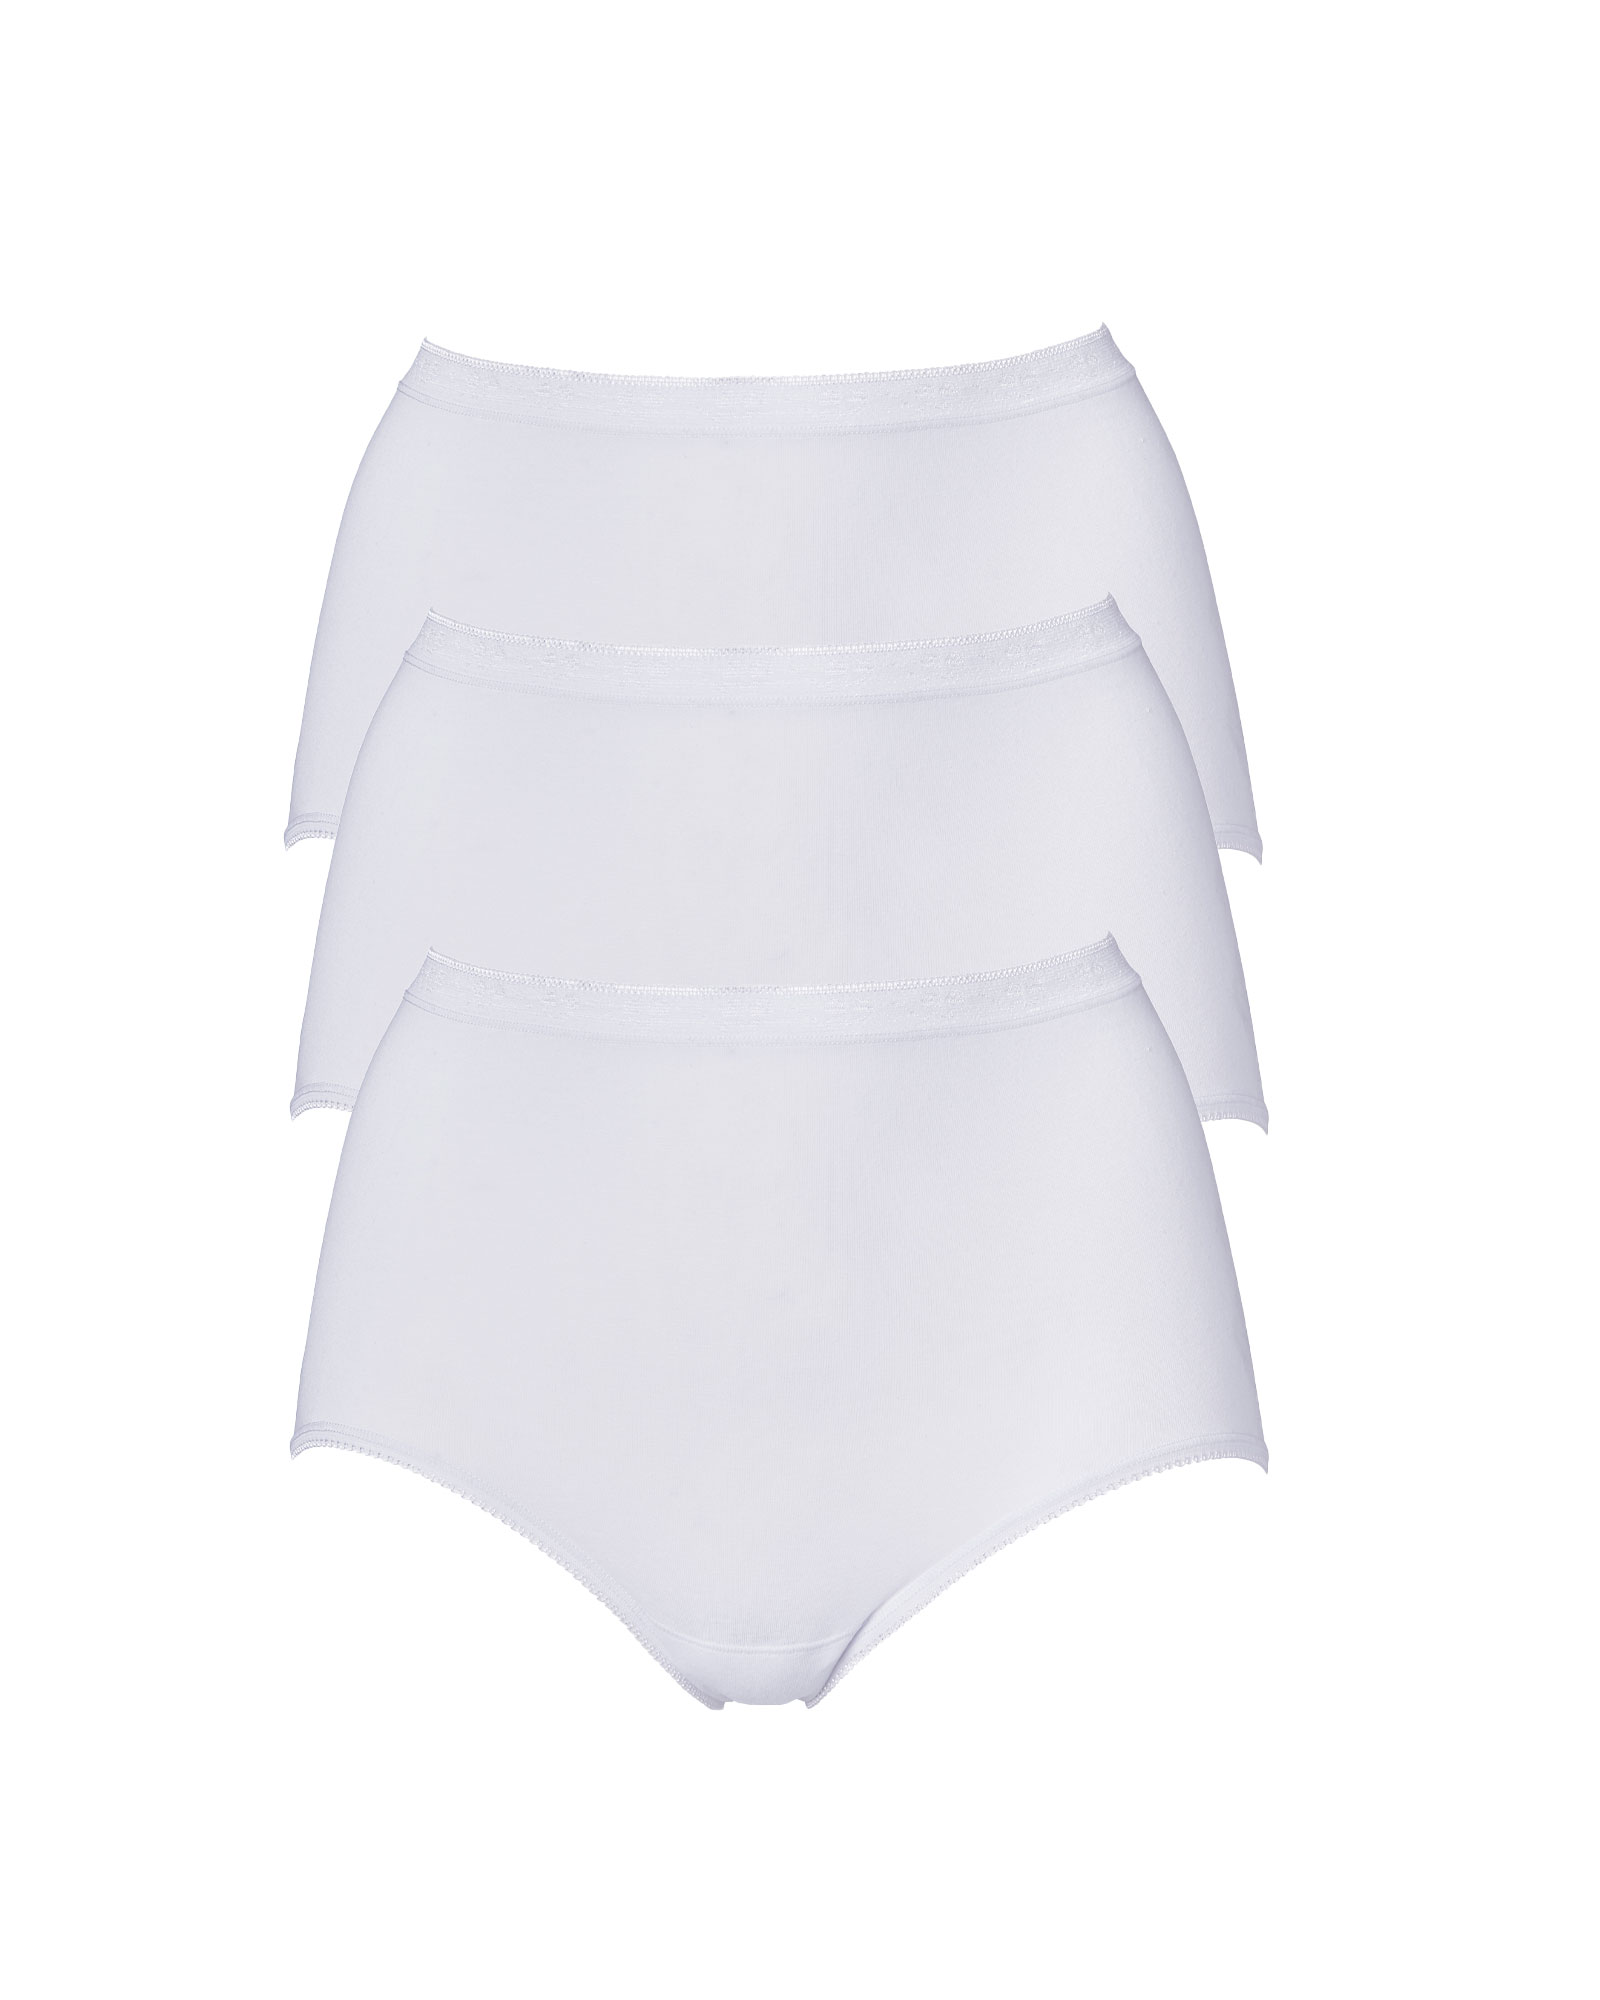 Women's Boxer Briefs and Briefs - Cotton Traders